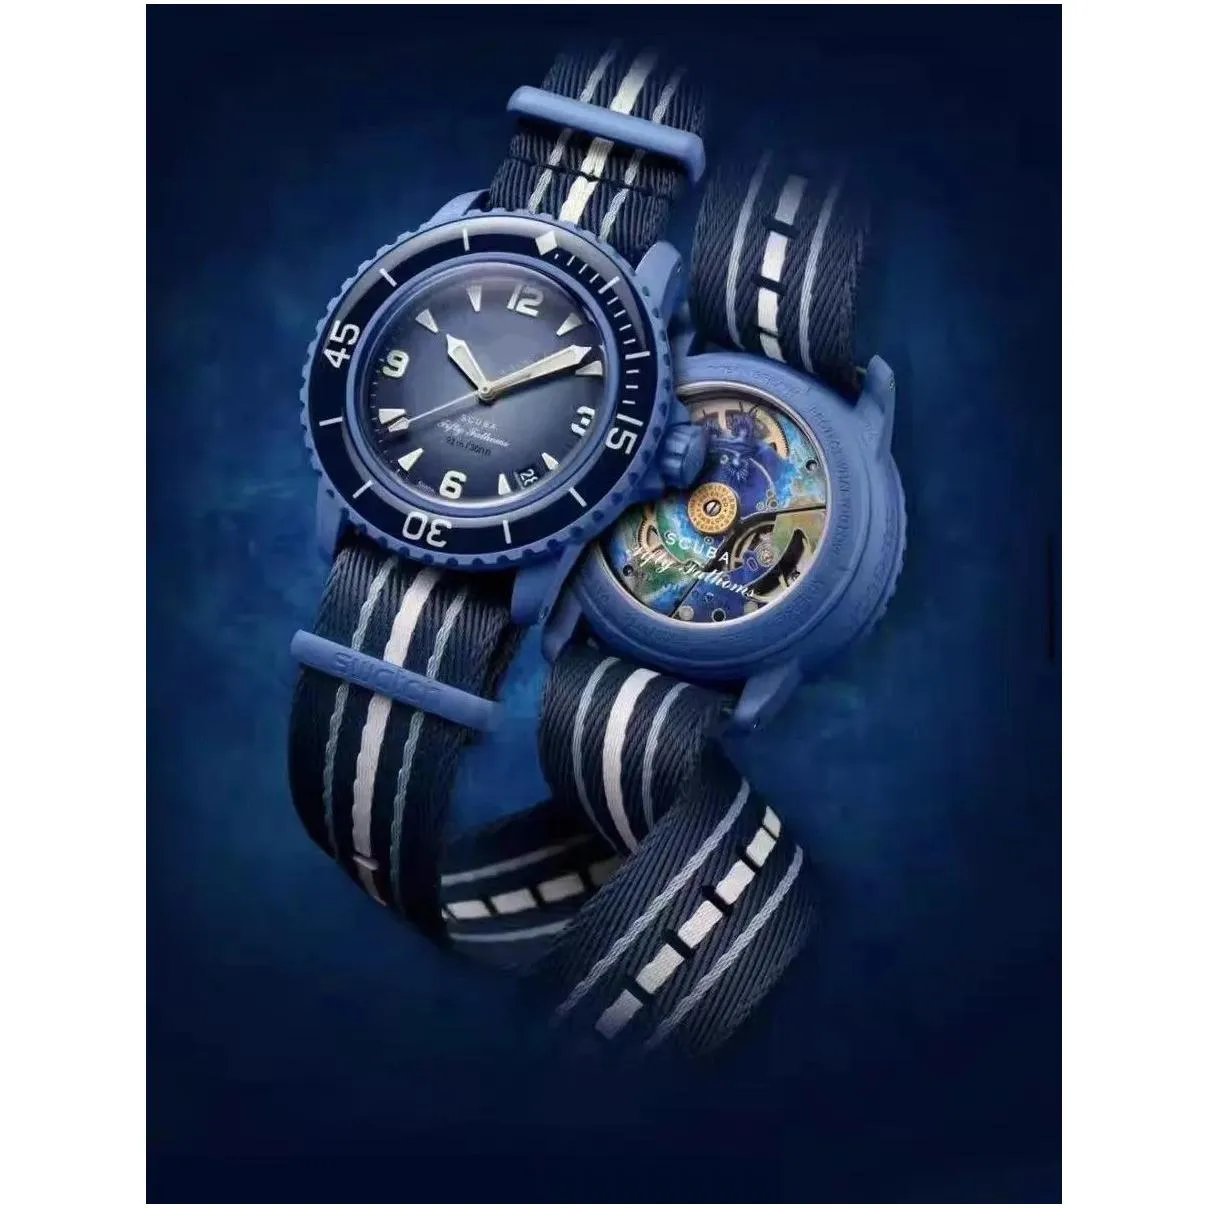 Ocean Watch Mens Watch Bioceramic Automatic Mechanical Watches High Quality Full Function Pacific Ocean Antarctic Ocean Indian Watch Designer Movement